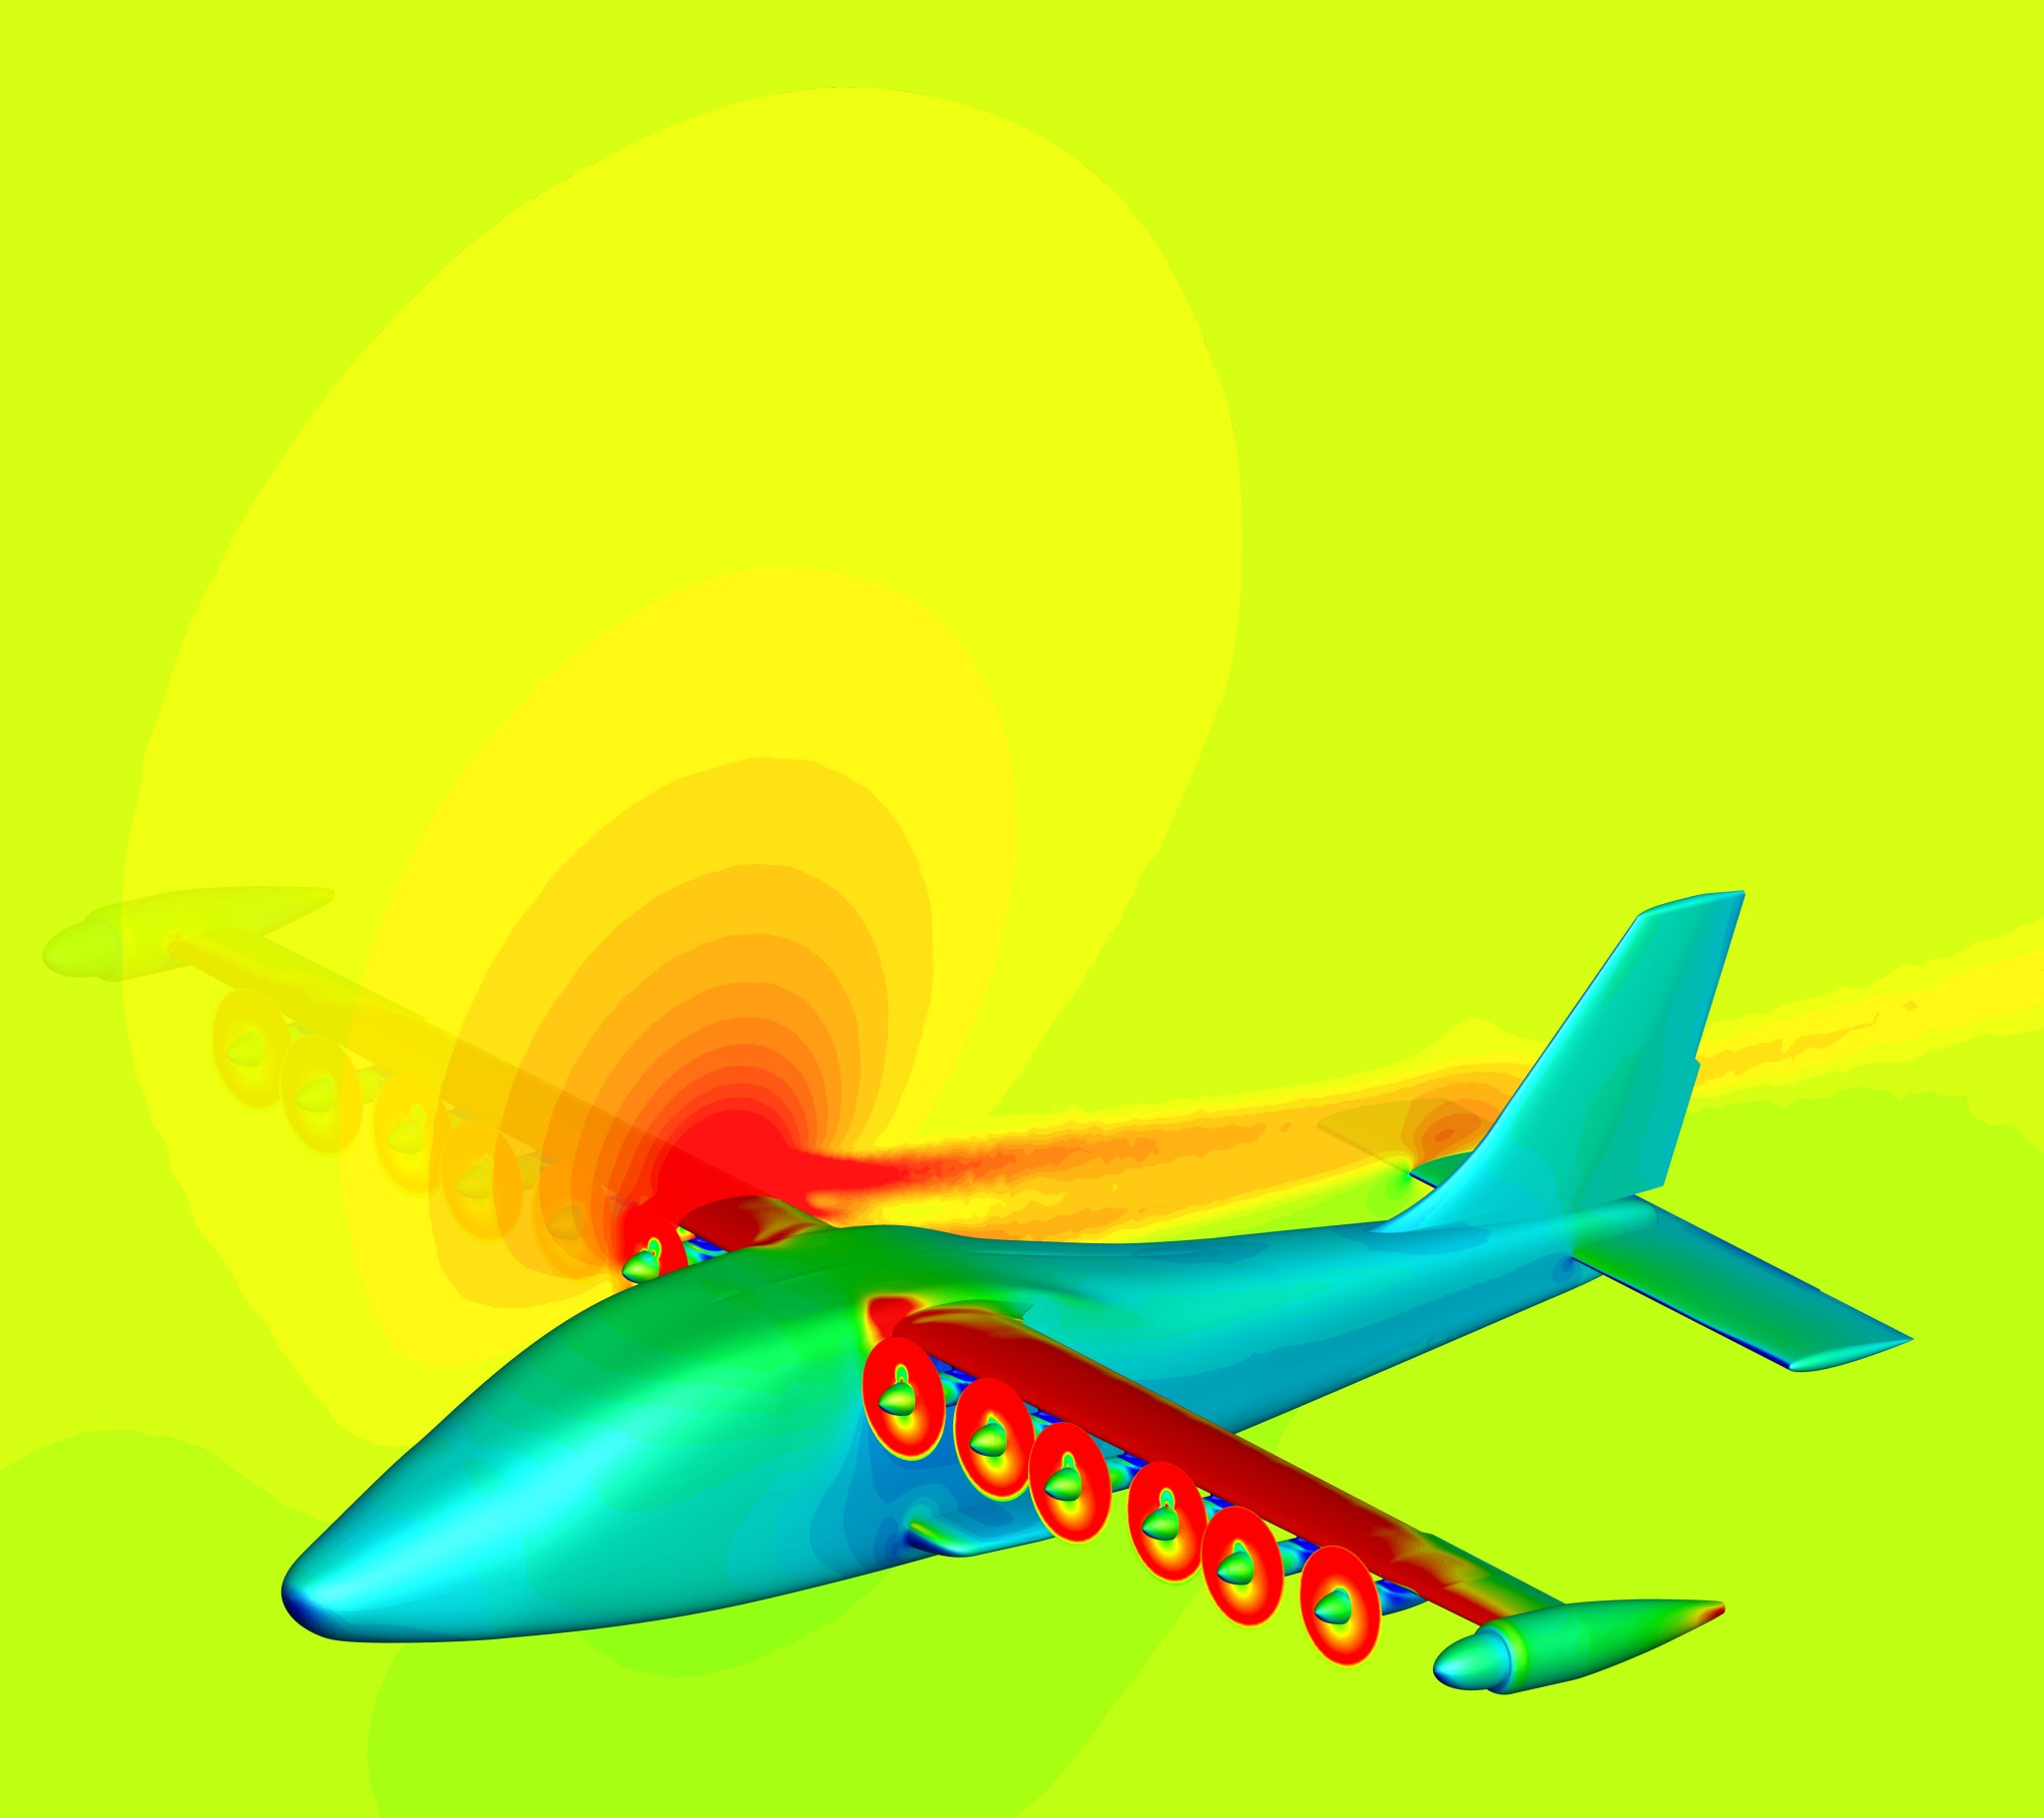 This simulation of NASA’s X-57 Maxwell airplane with all of the high-lift propellers operating.